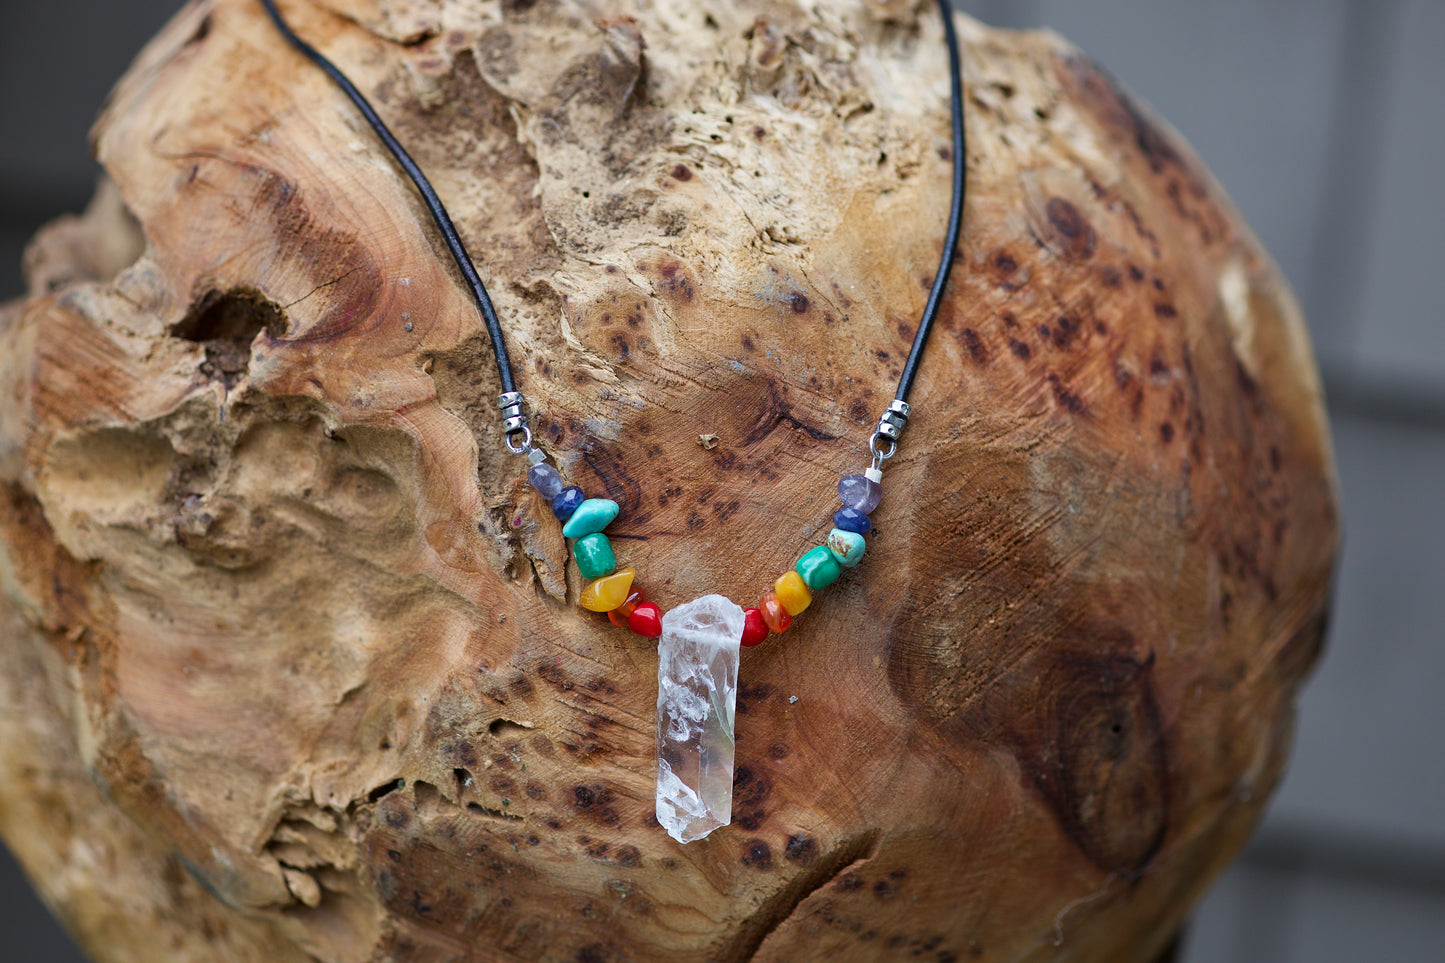 Rainbow / Pride / Chakra Stones and Clear Quartz Warrior Crystal, Sterling Silver, and Leather Necklace